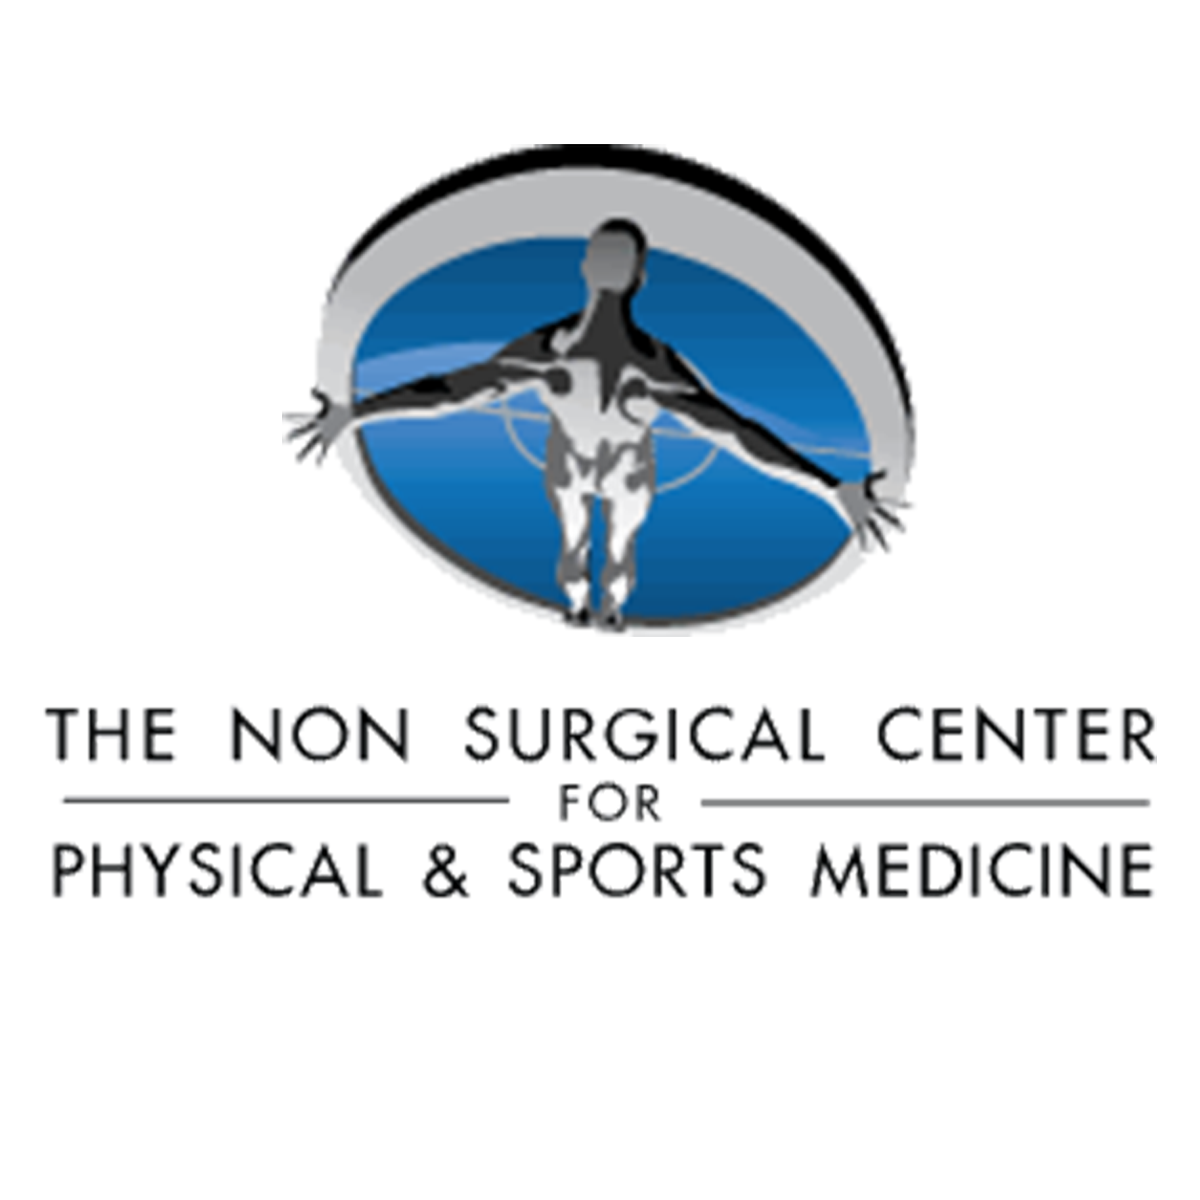 The Non Surgical Center for Physical & Sports Medicine